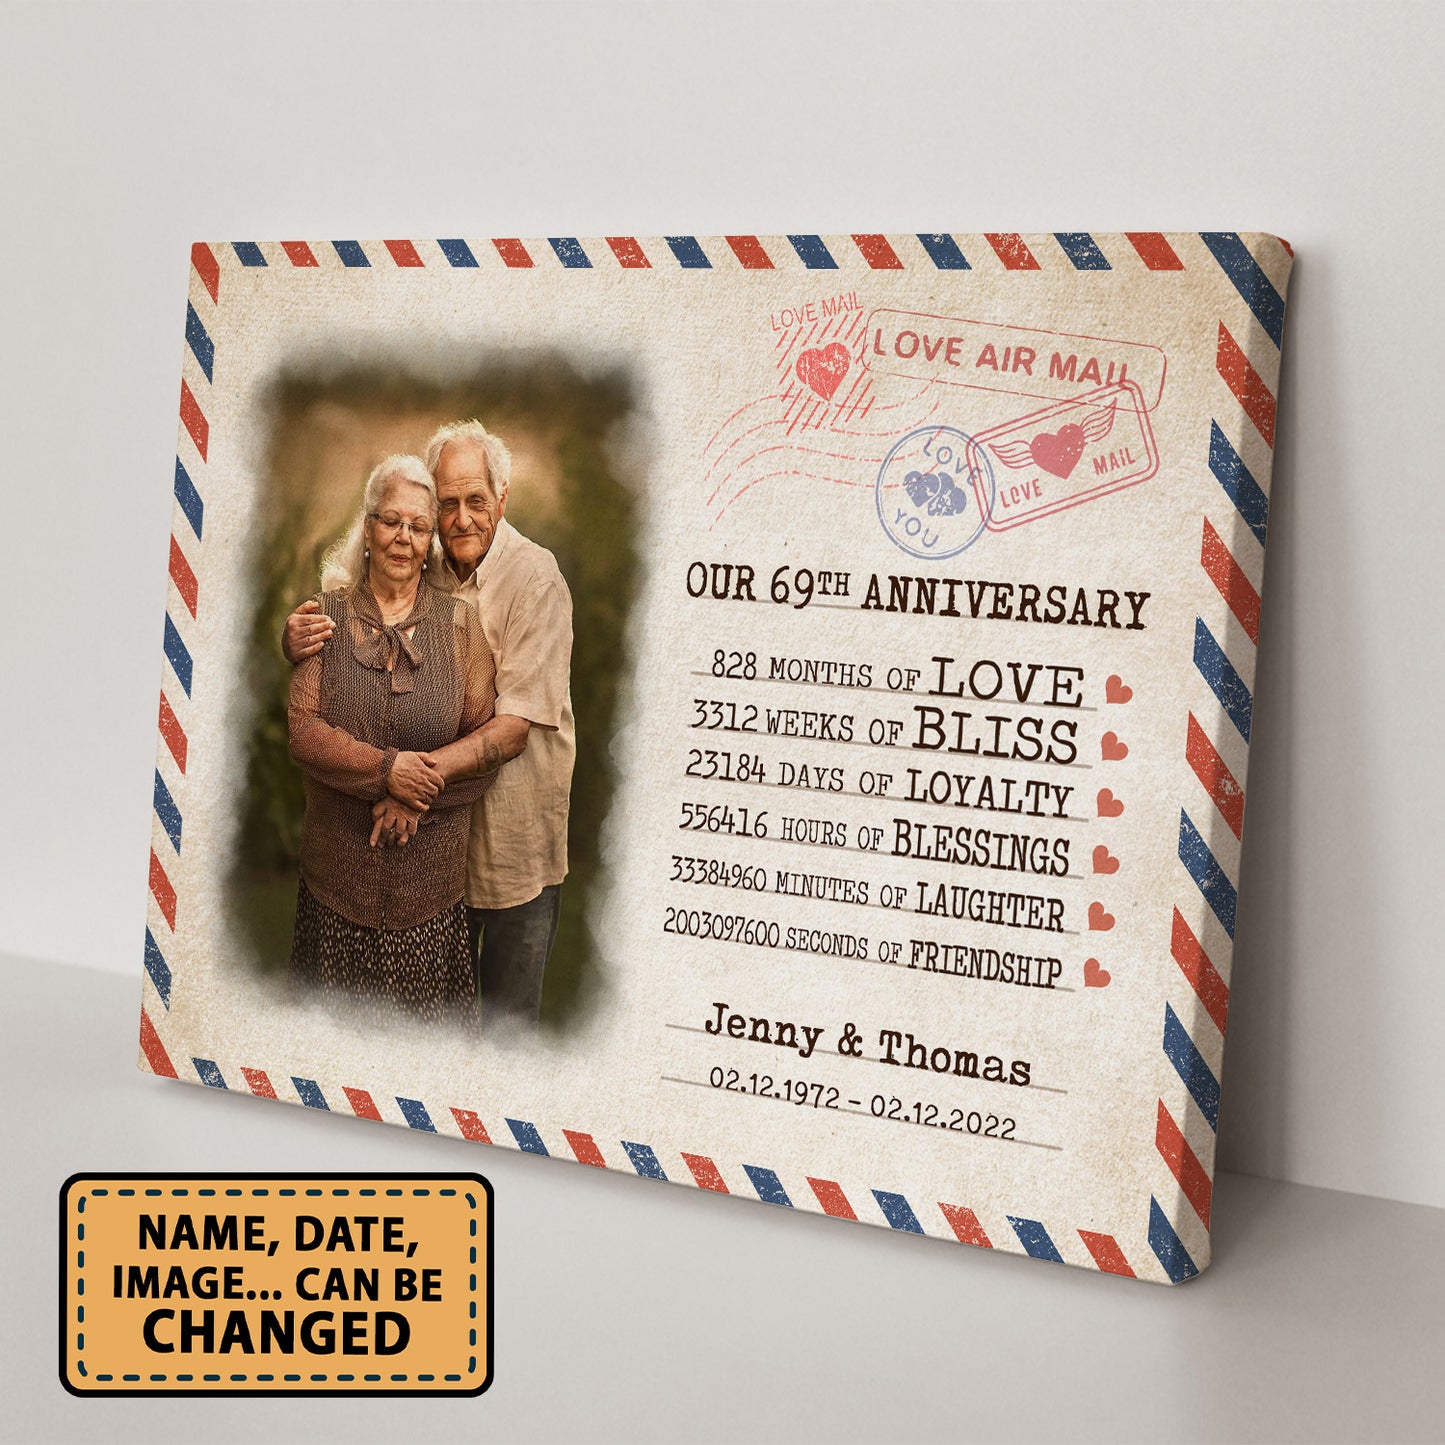 Our 69th Anniversary Letter Valentine Gift Personalized Canvas